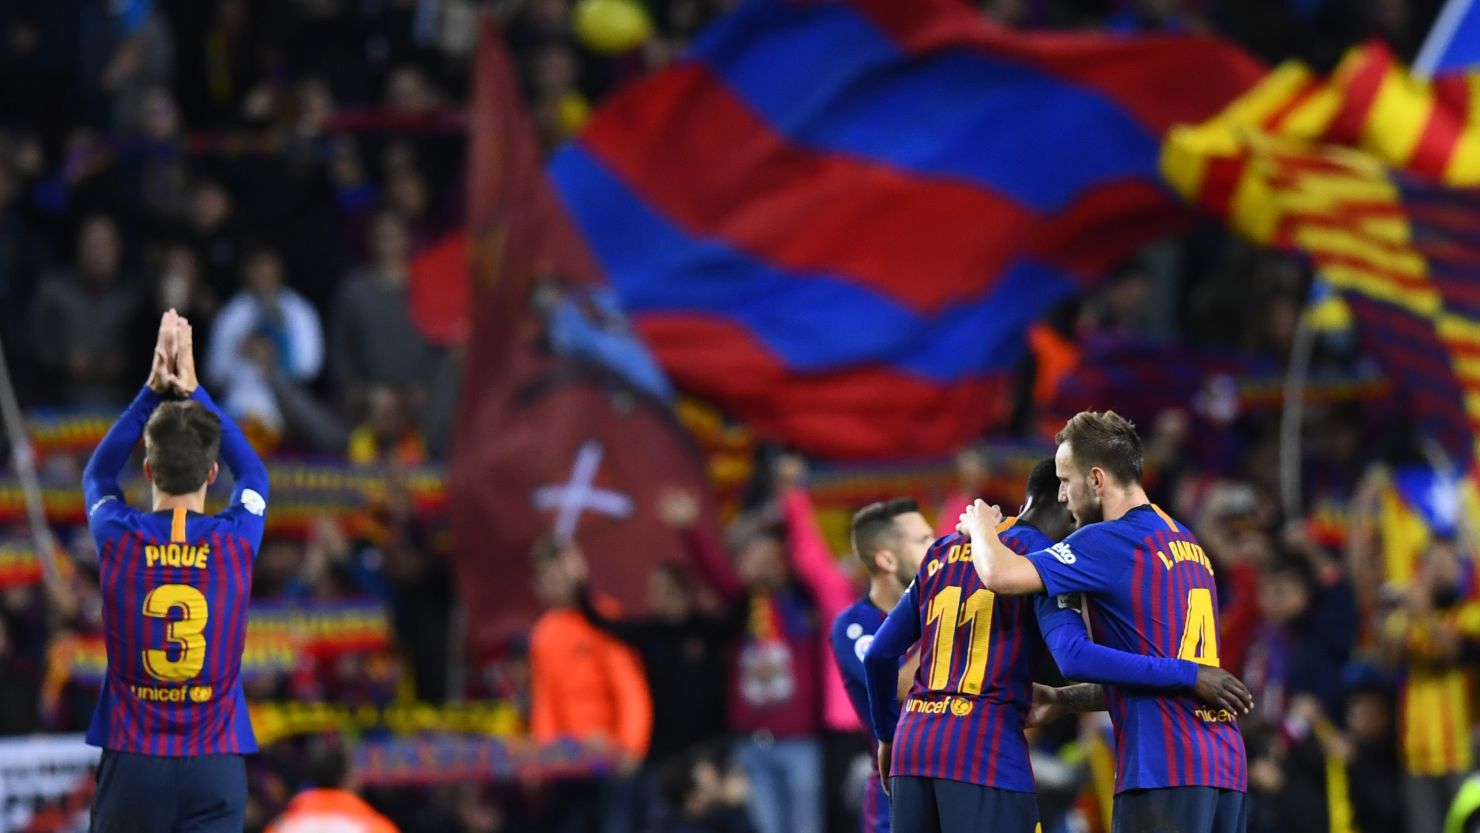 Barcelona players celebrate at the end of the La Liga match at the Camp Nou stadium in Barcelona.